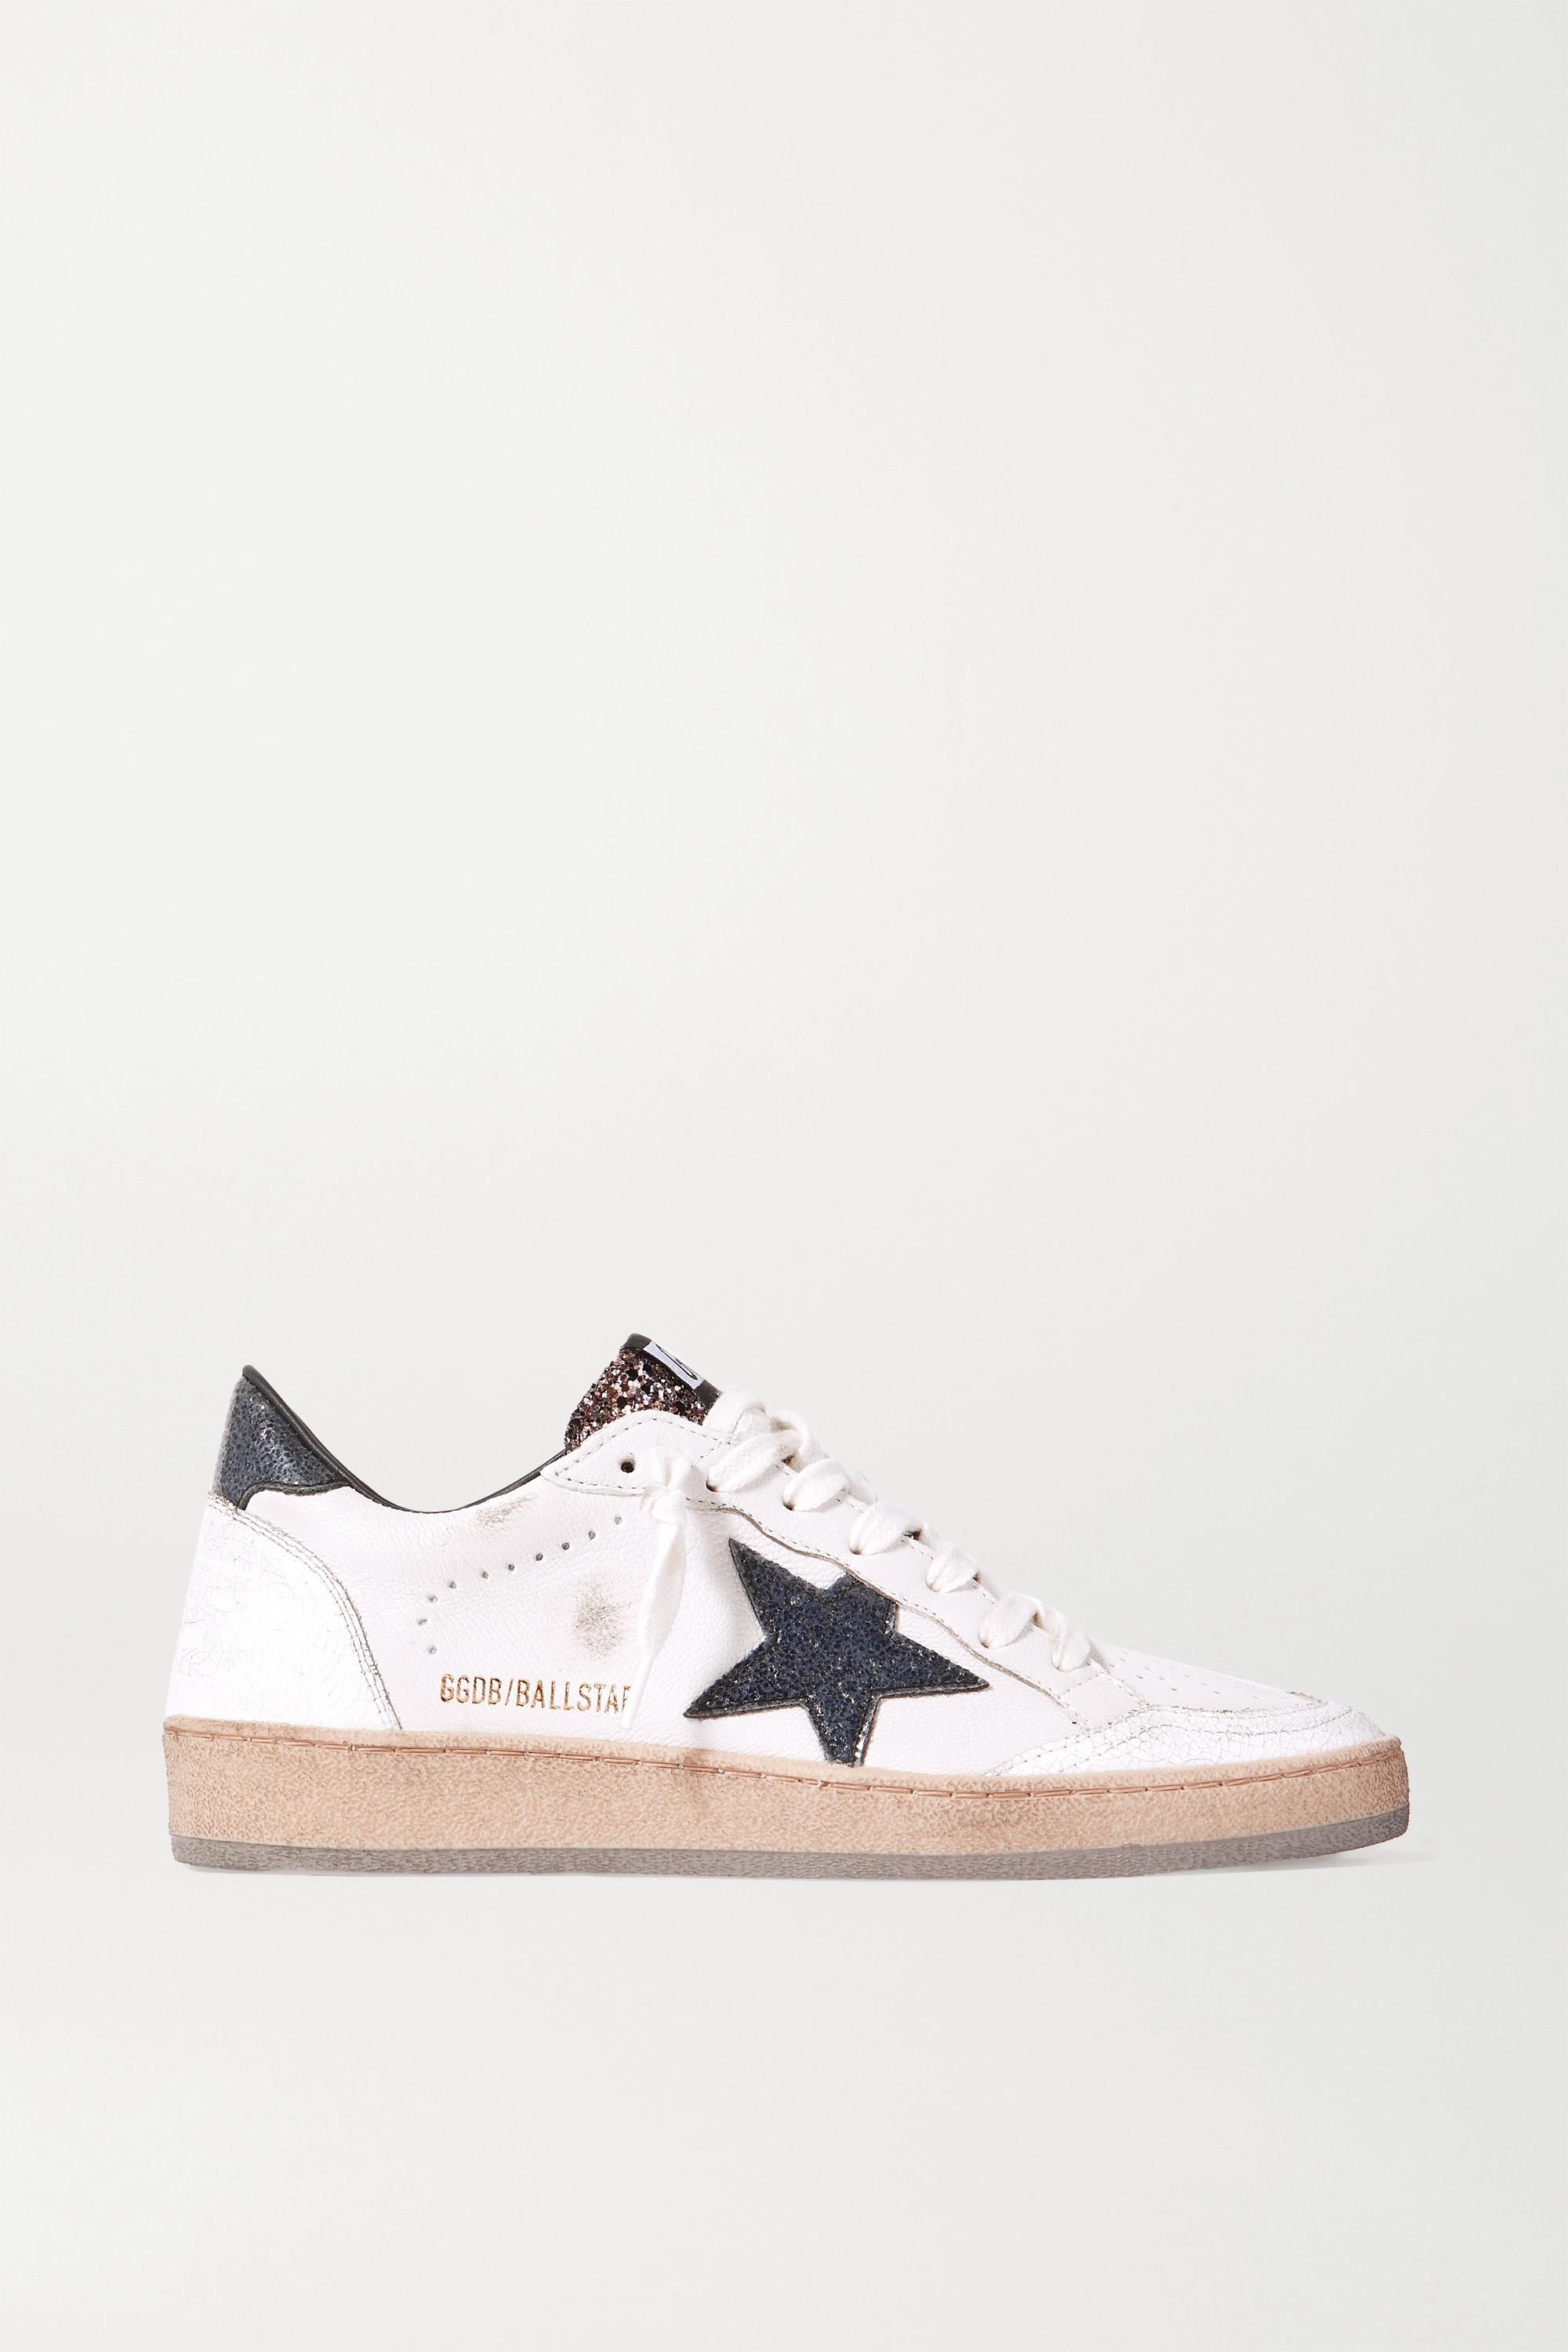 Ball Star LAB Sneakers In White Leather With Perforated